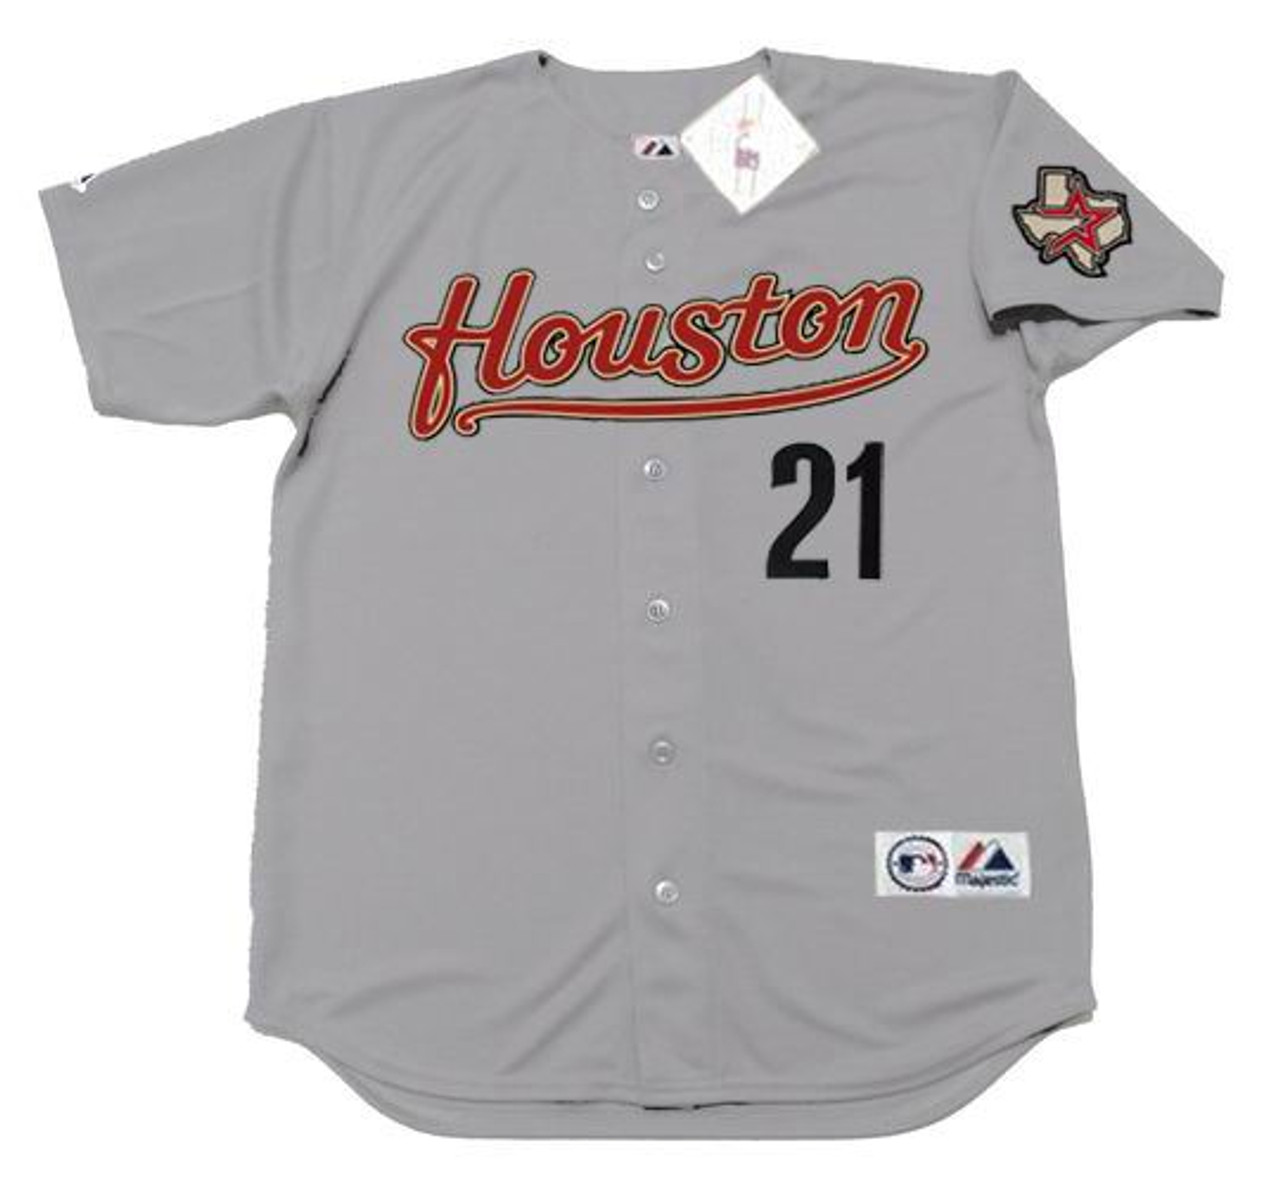 Houston Astros Andy Pettitte#21 VINTAGE NIKE Jersey 2003 Shooting Star  Youth Med